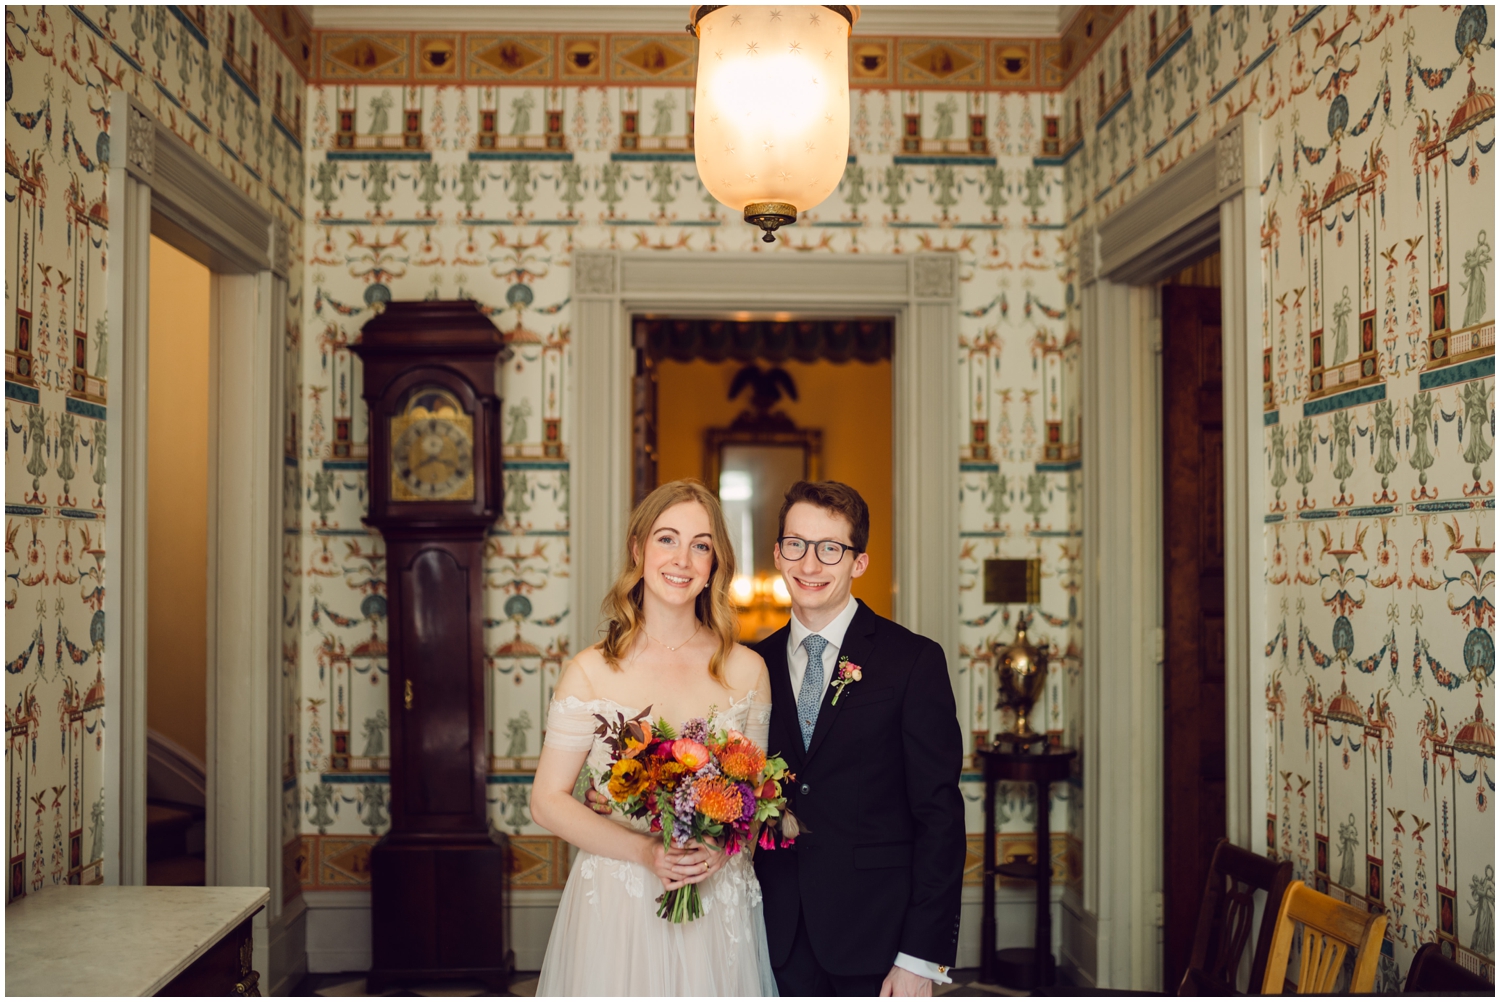 A bride and groom pose in the entrance hall at their Hill Physic House wedding.